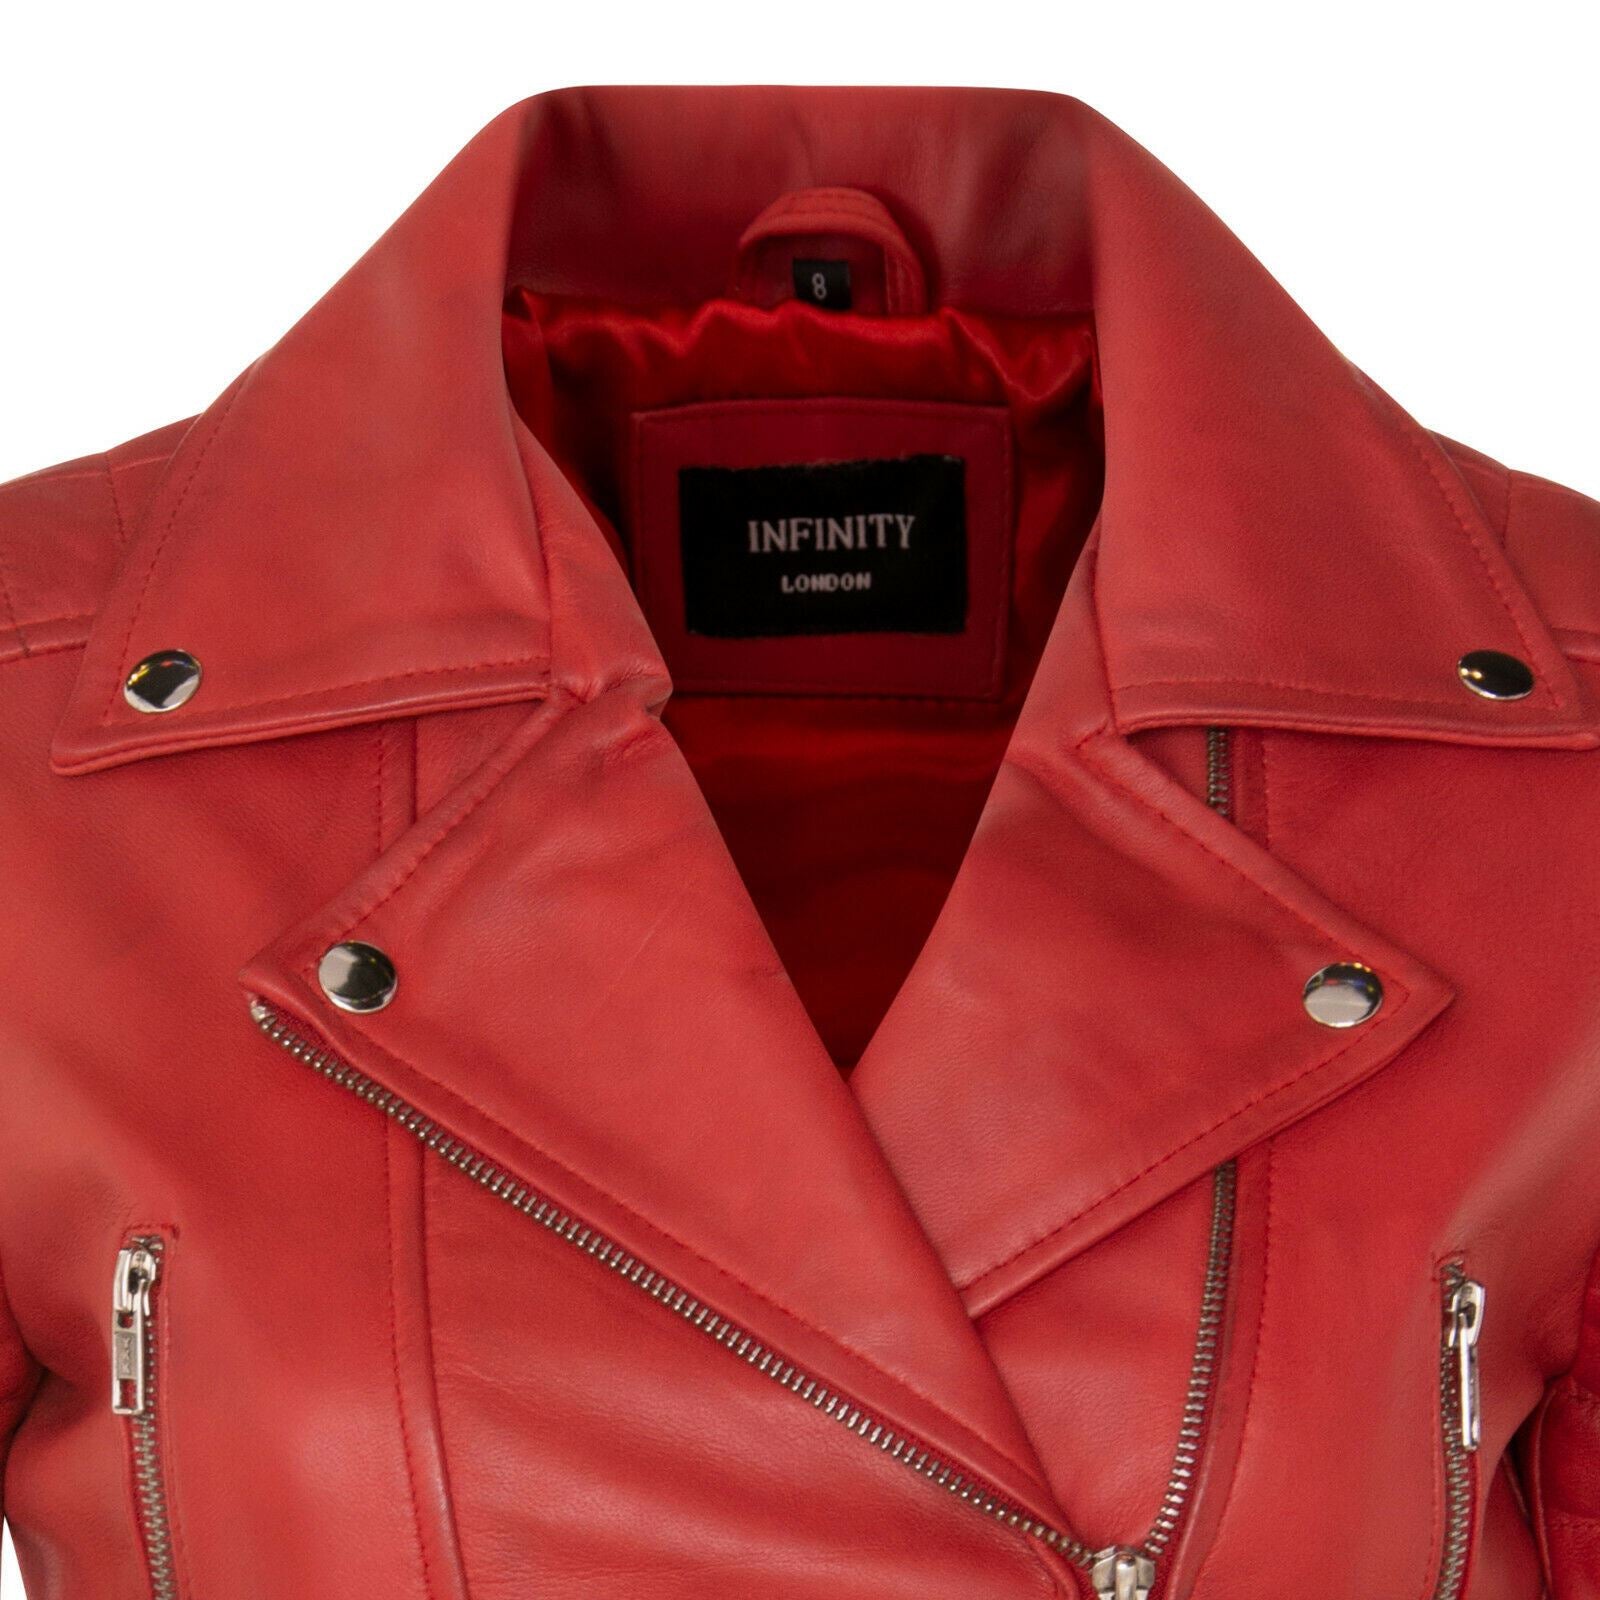 Womens Brando Cropped Leather Jacket-Longtown